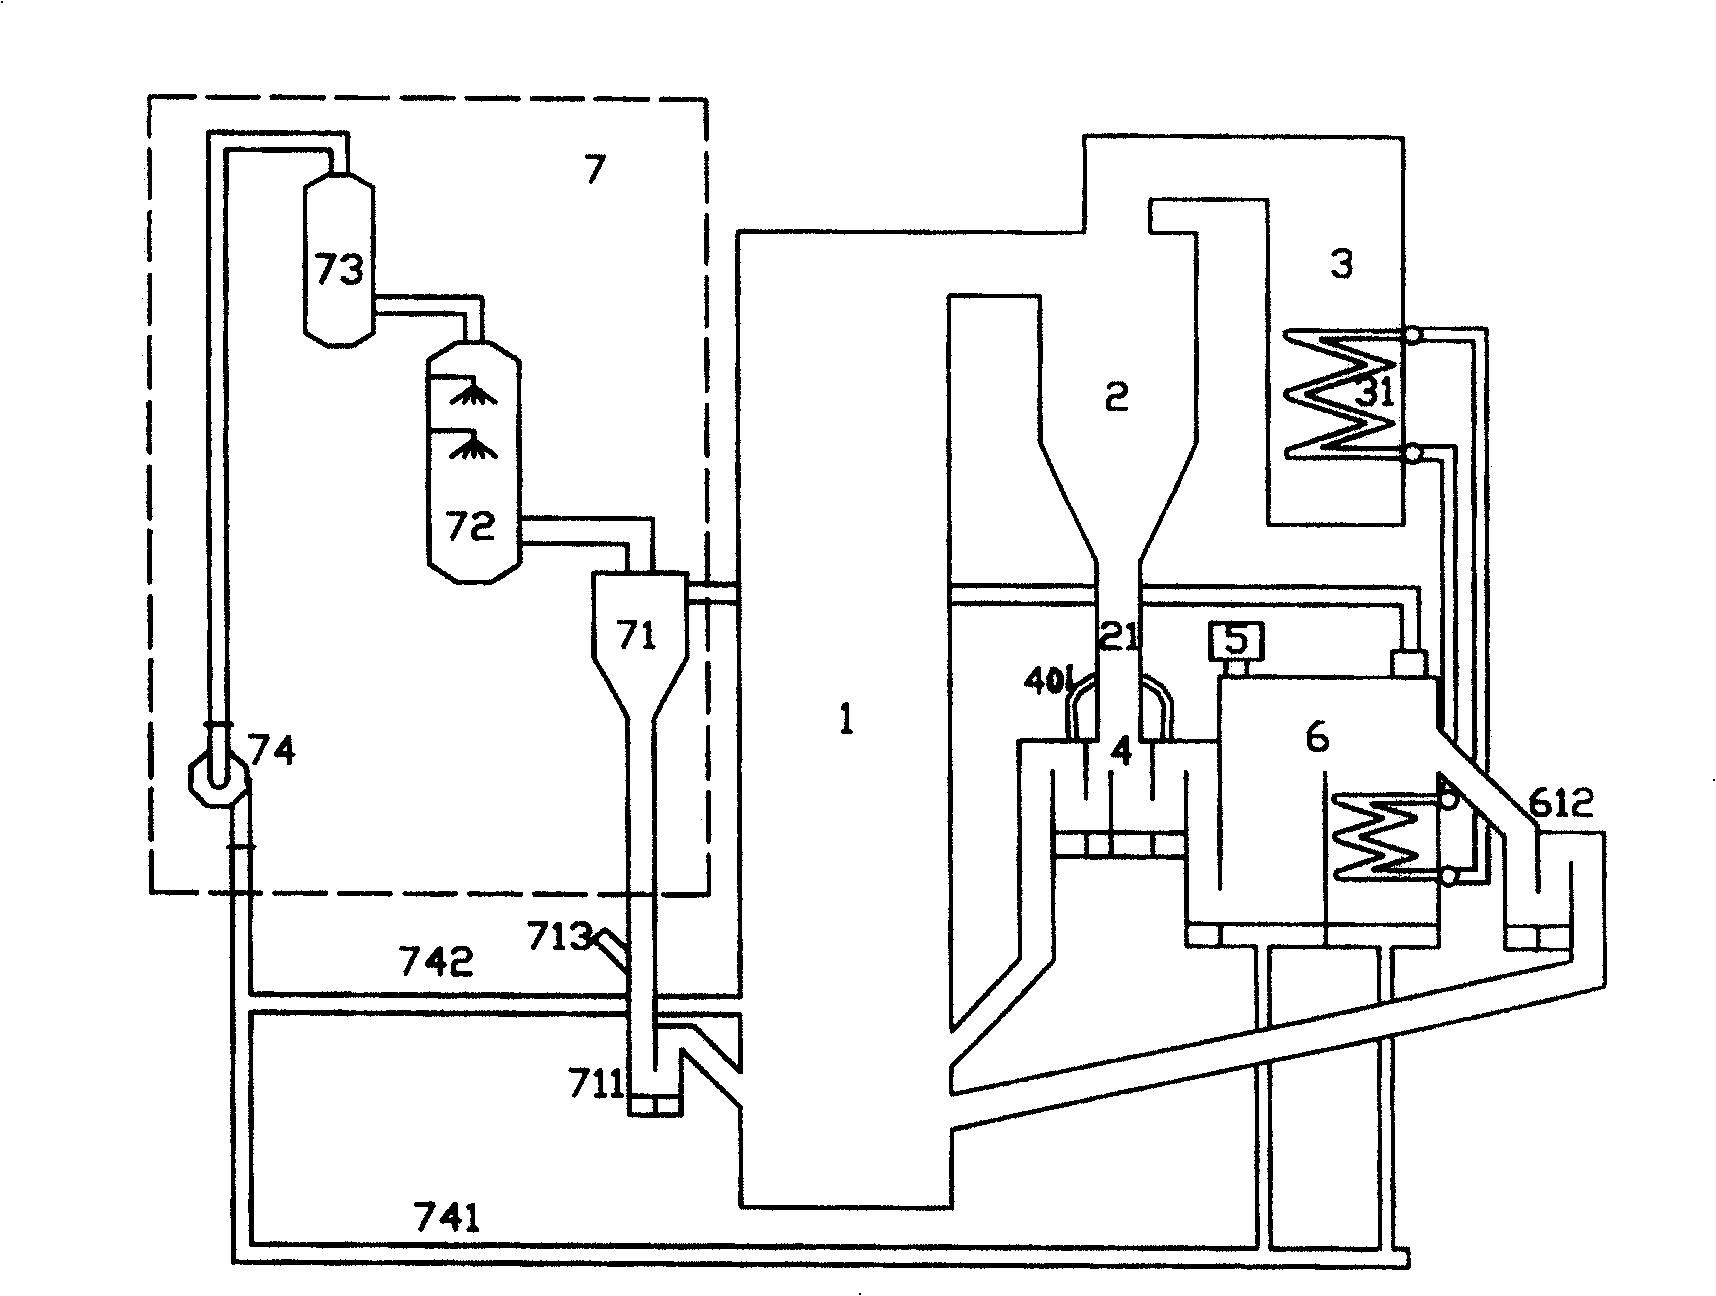 Wet mud burning treatment apparatus with compound dryer